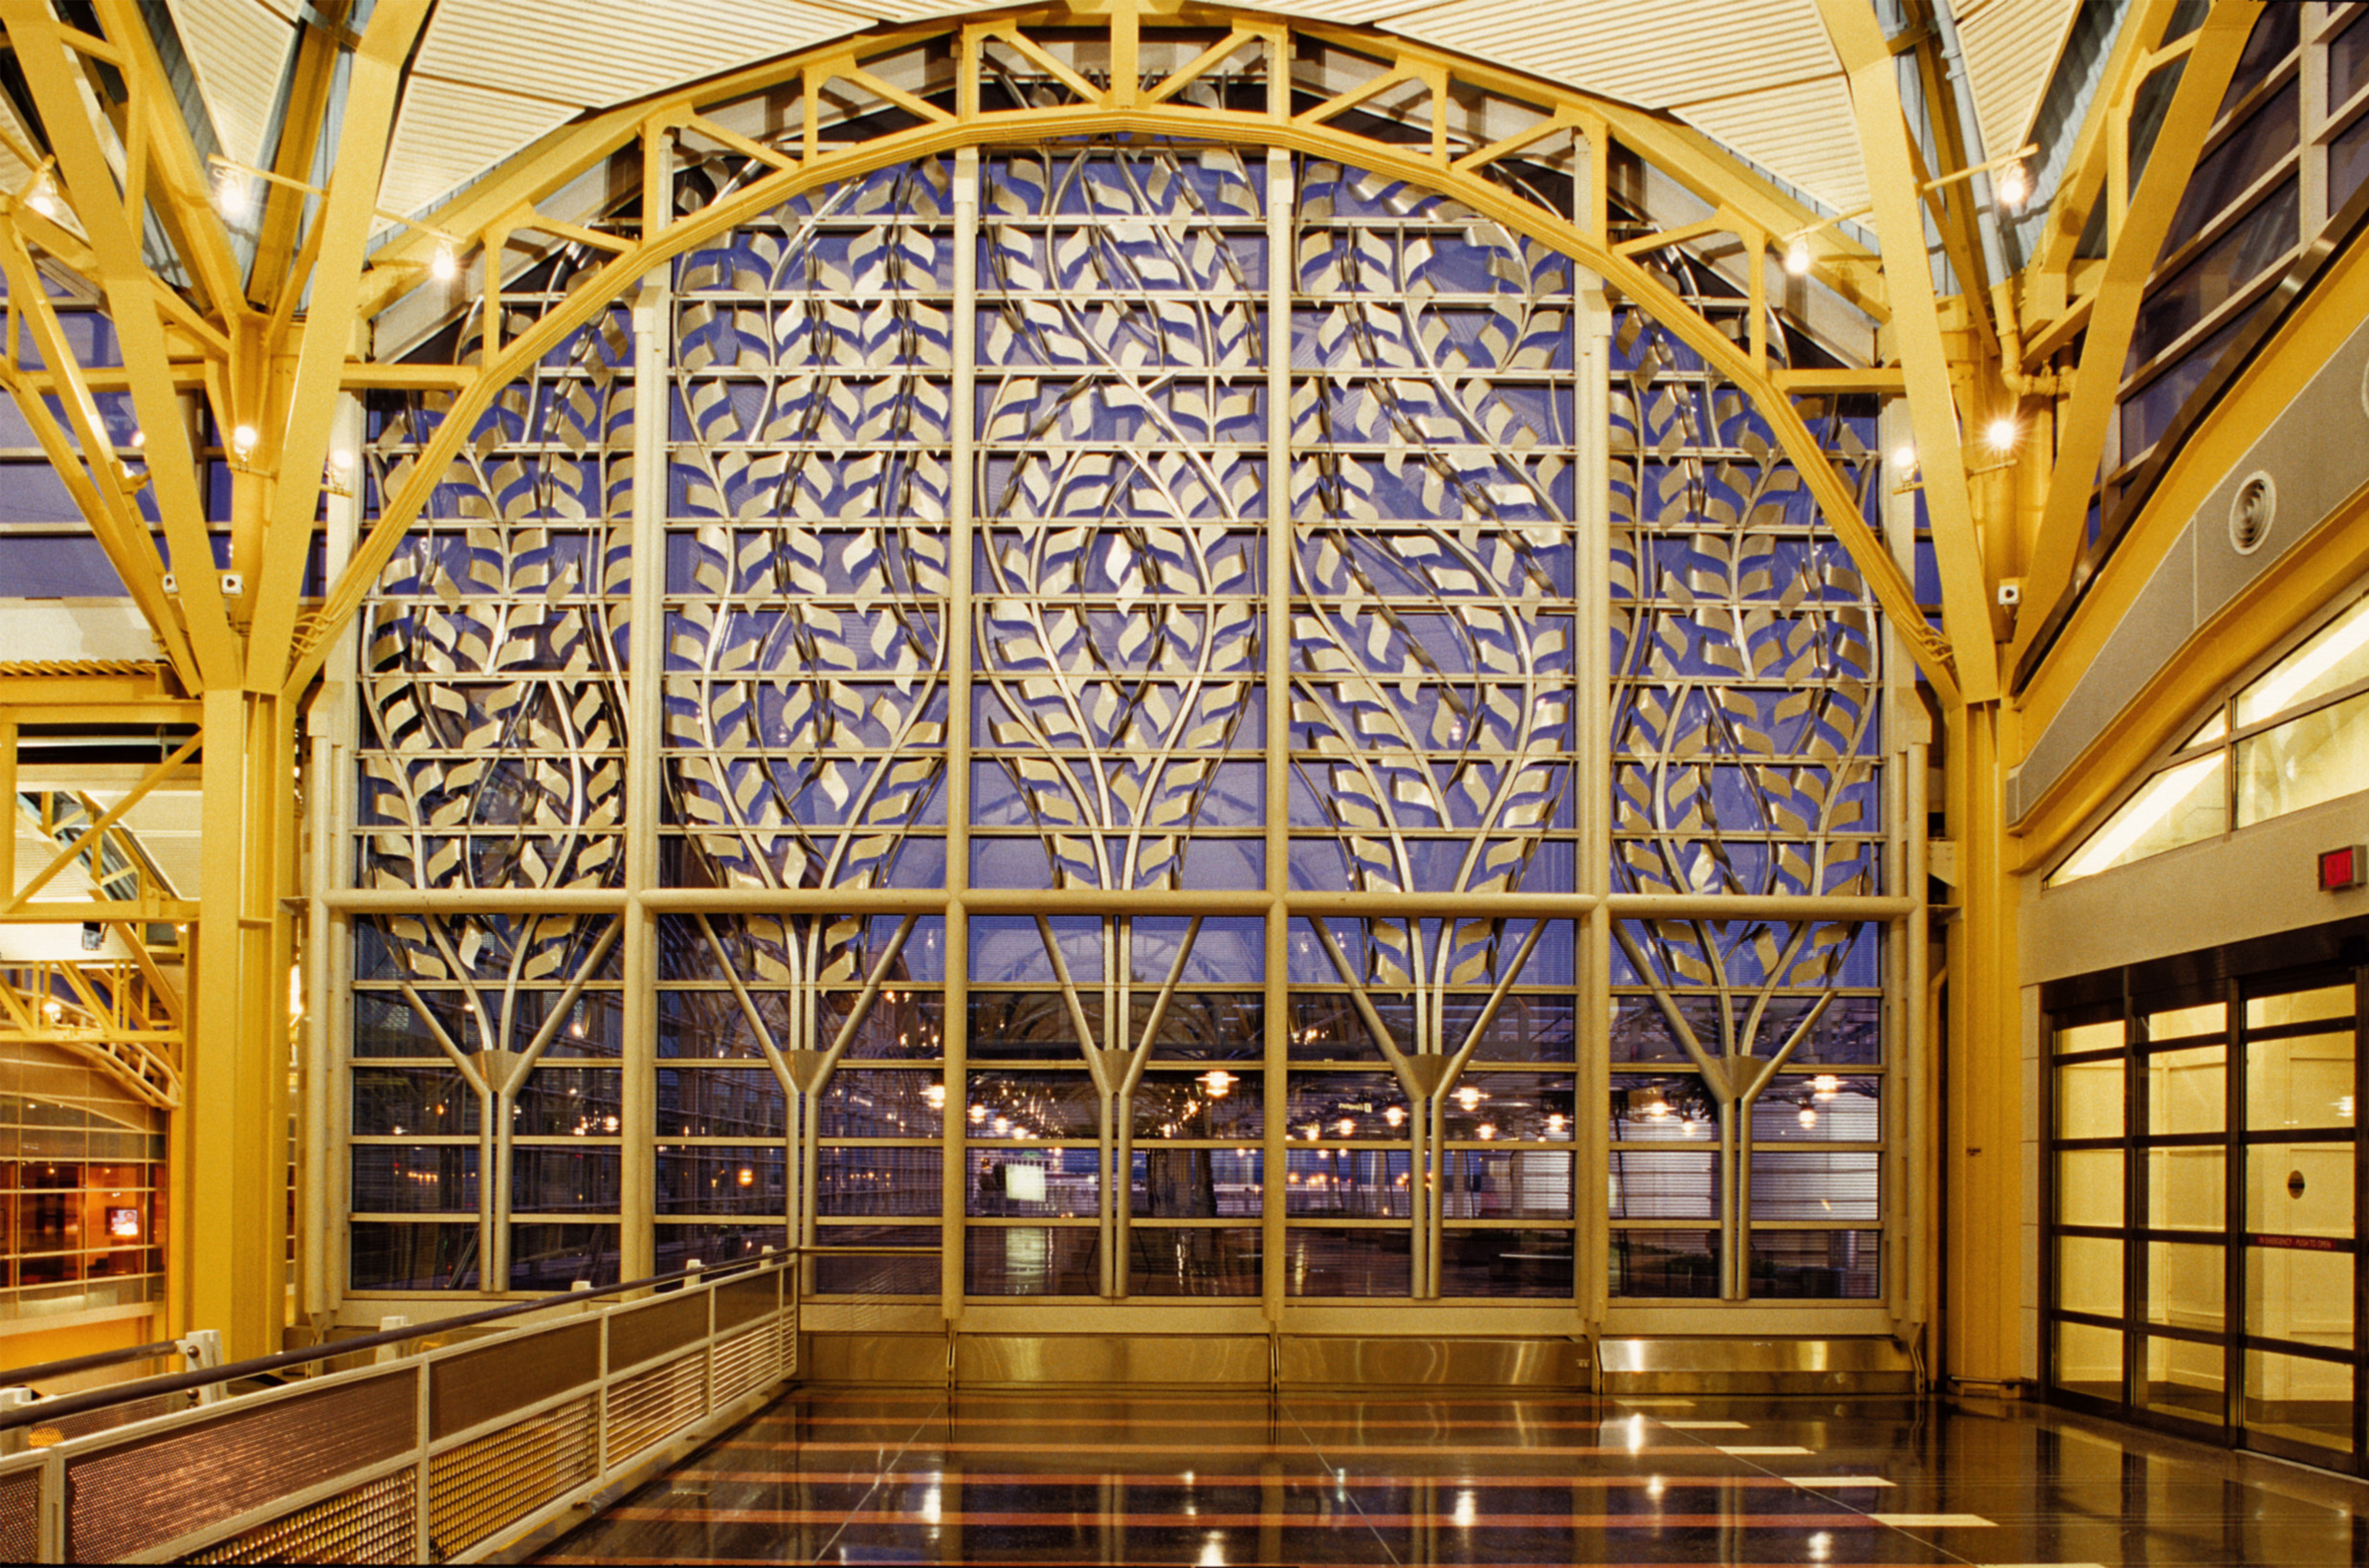 Ronald Reagan National Airport – Window Tracery